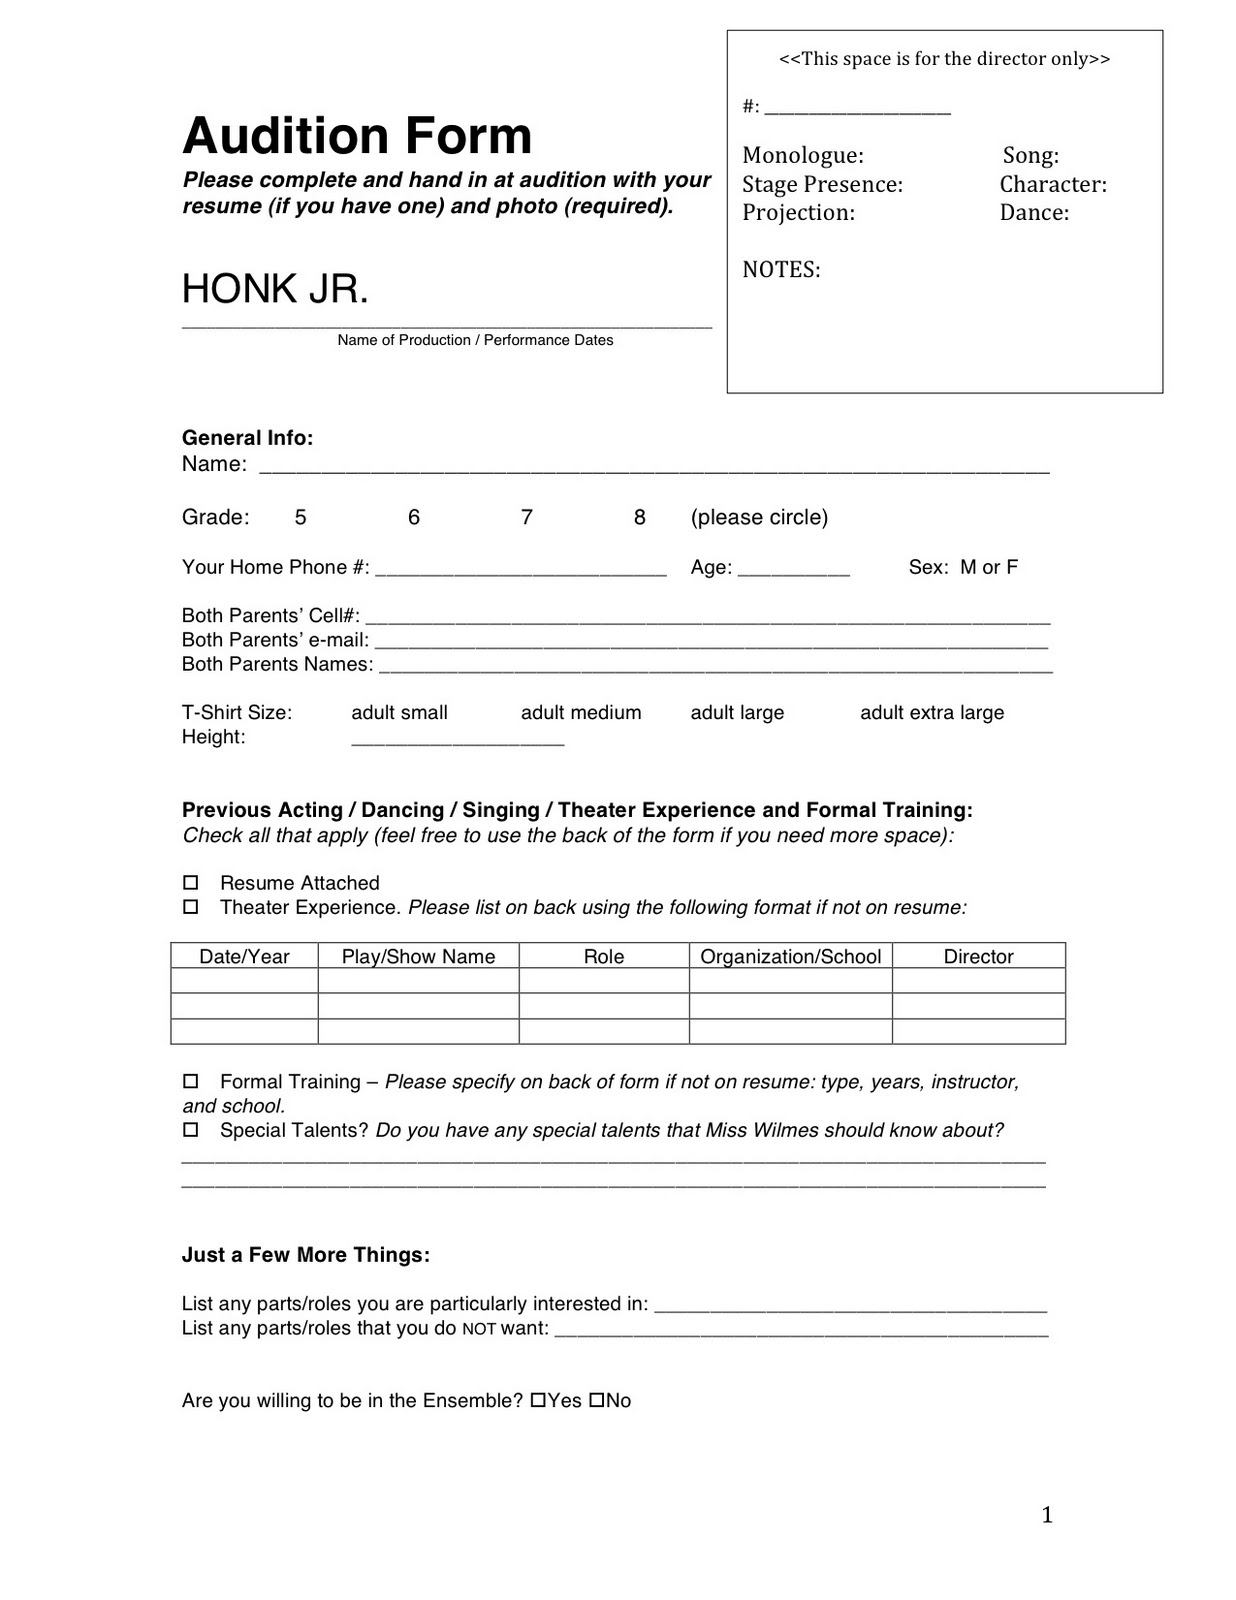 Wyoming Middle School Theater Spring Musical Audition Form